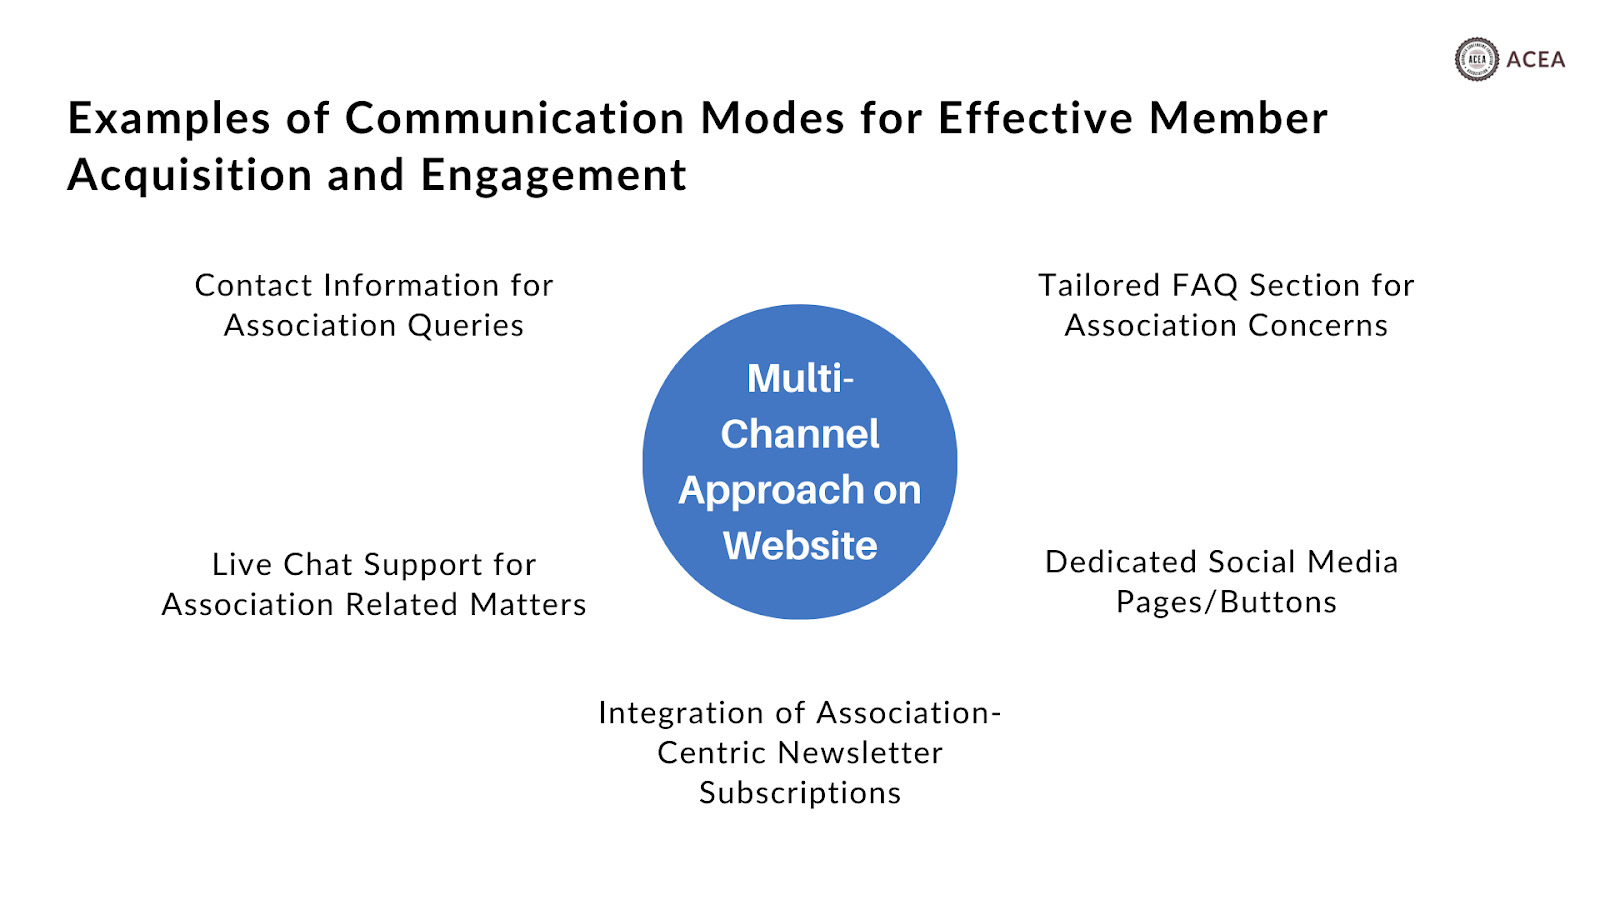 Communication modes for effective member acquisition and engagement